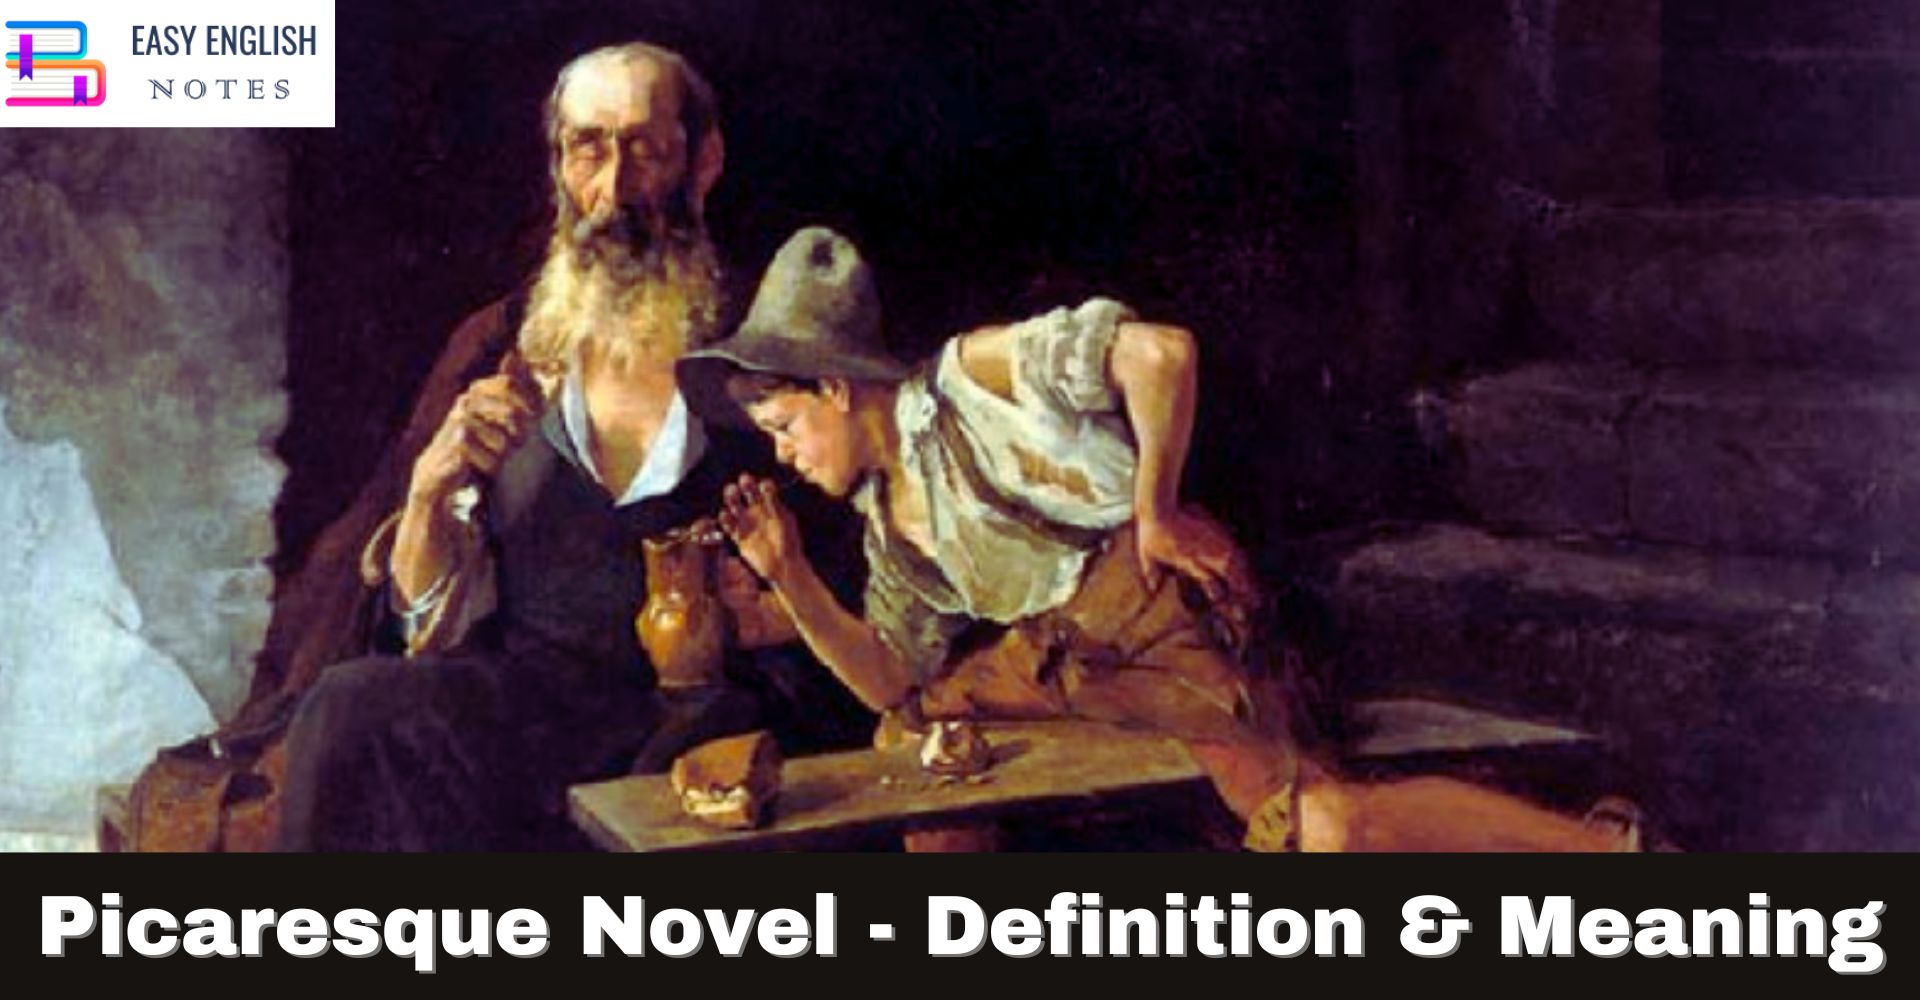 Picaresque Novel - Definition & Meaning